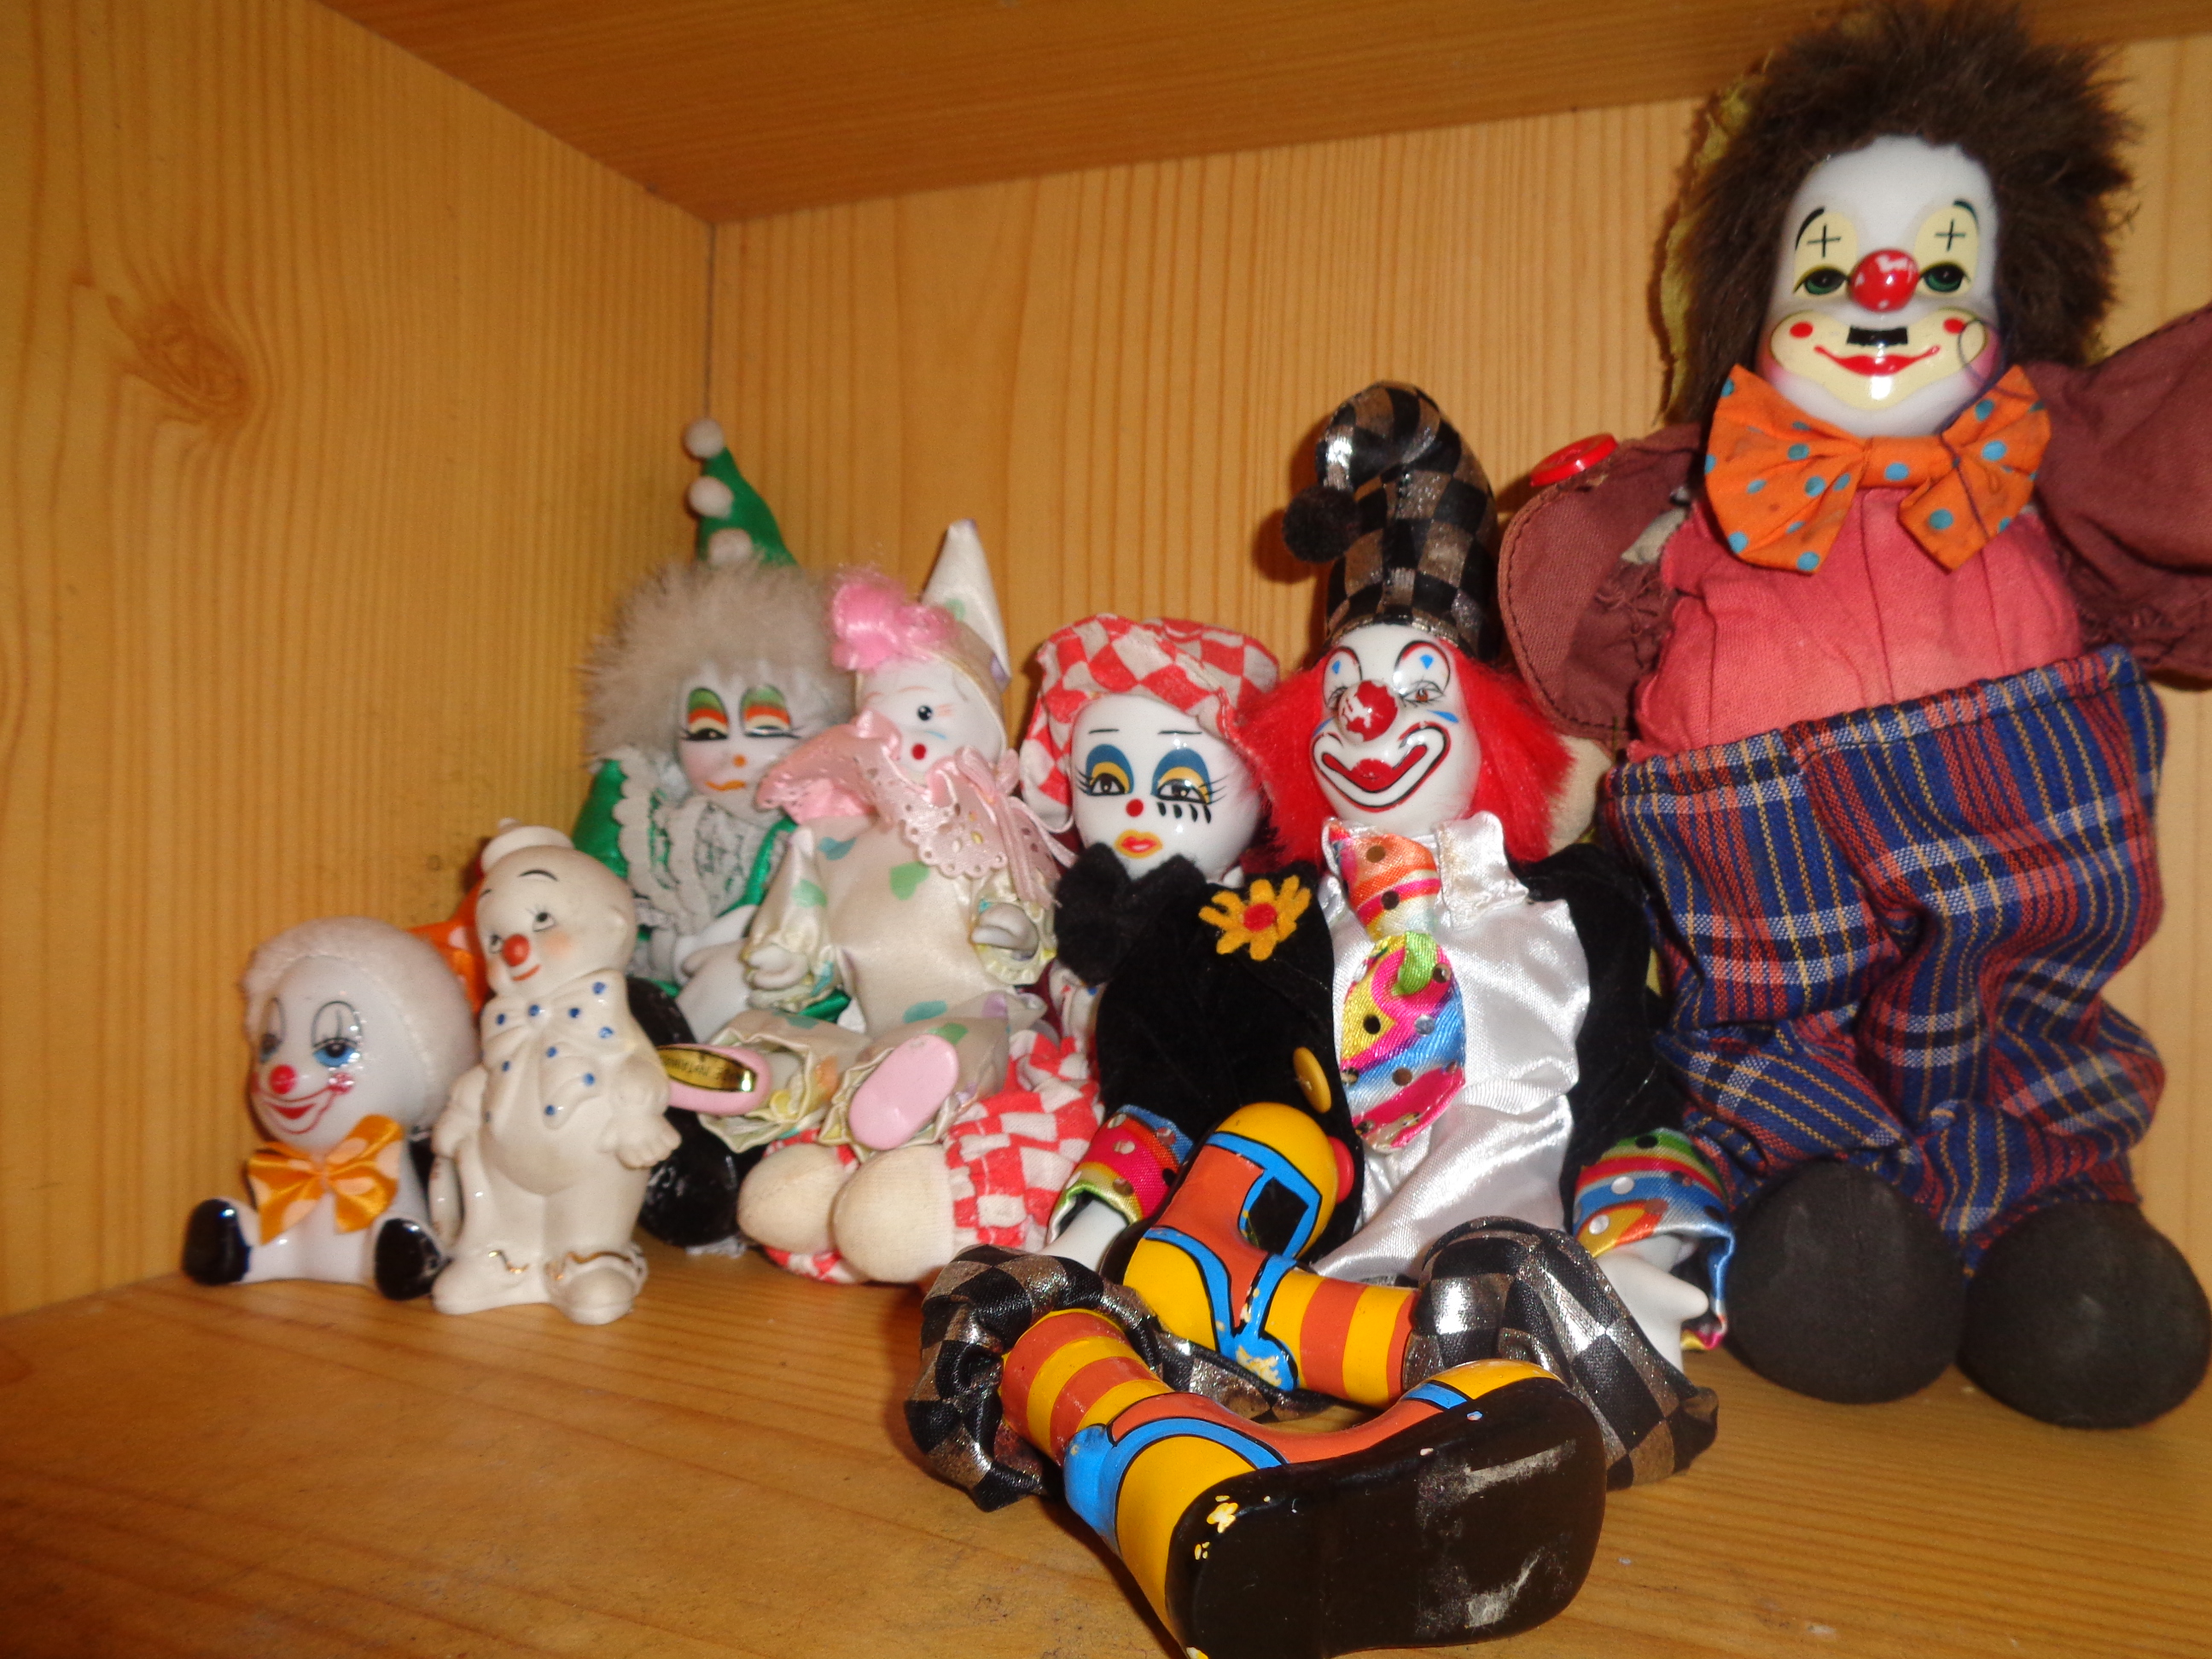 A photo of assorted porcelain clowns.